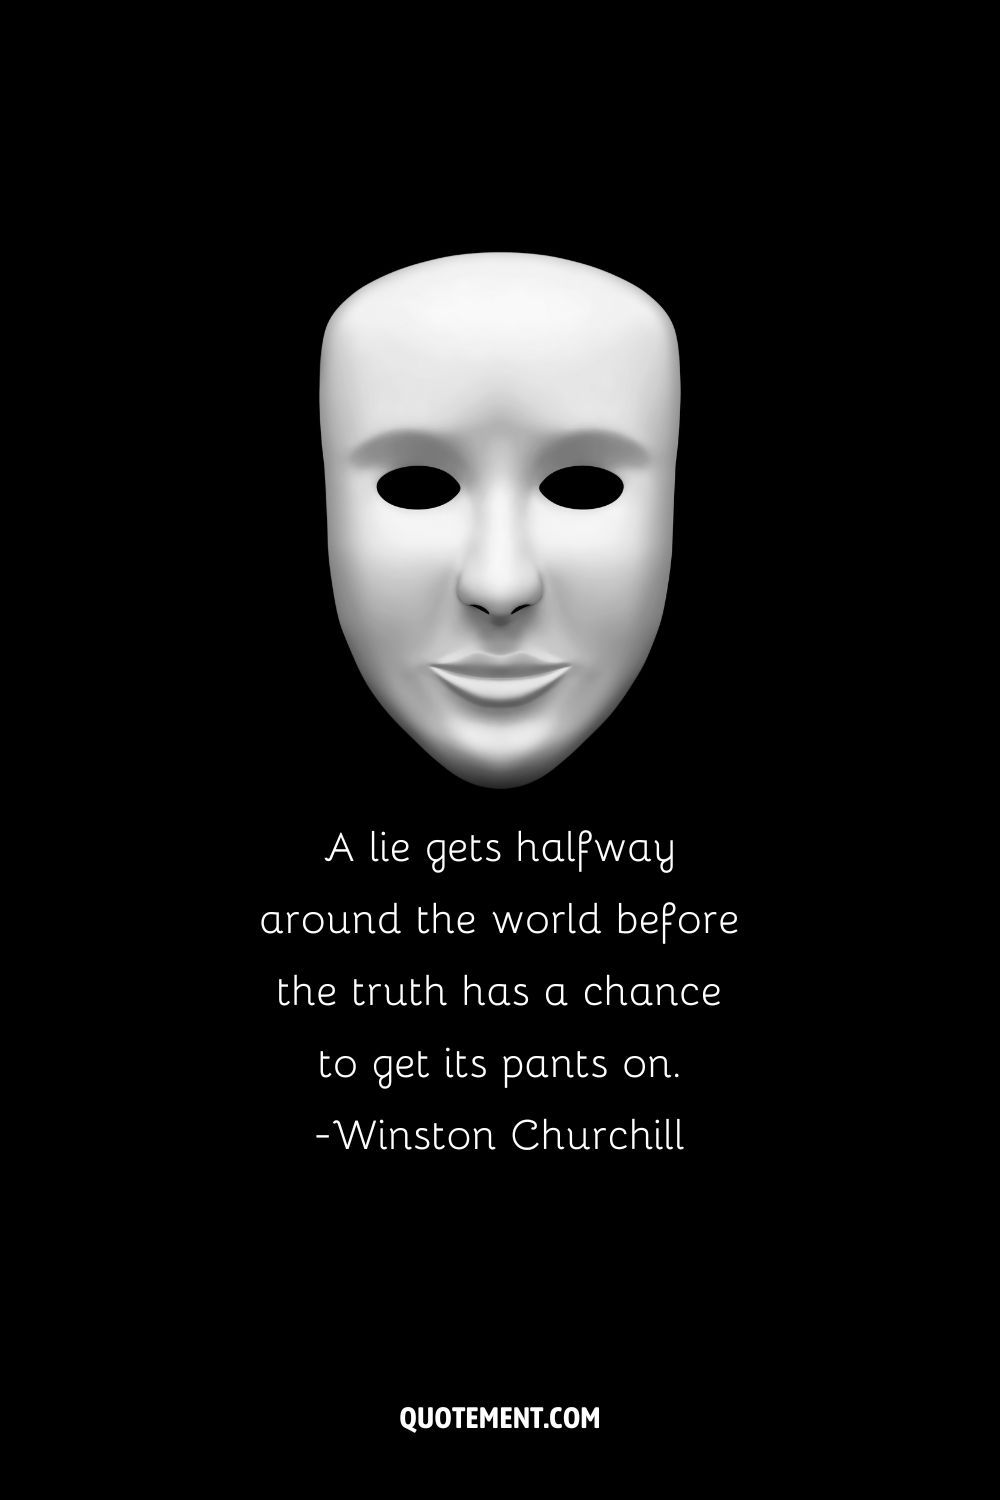 image of a white mask representing wise quote about lying
